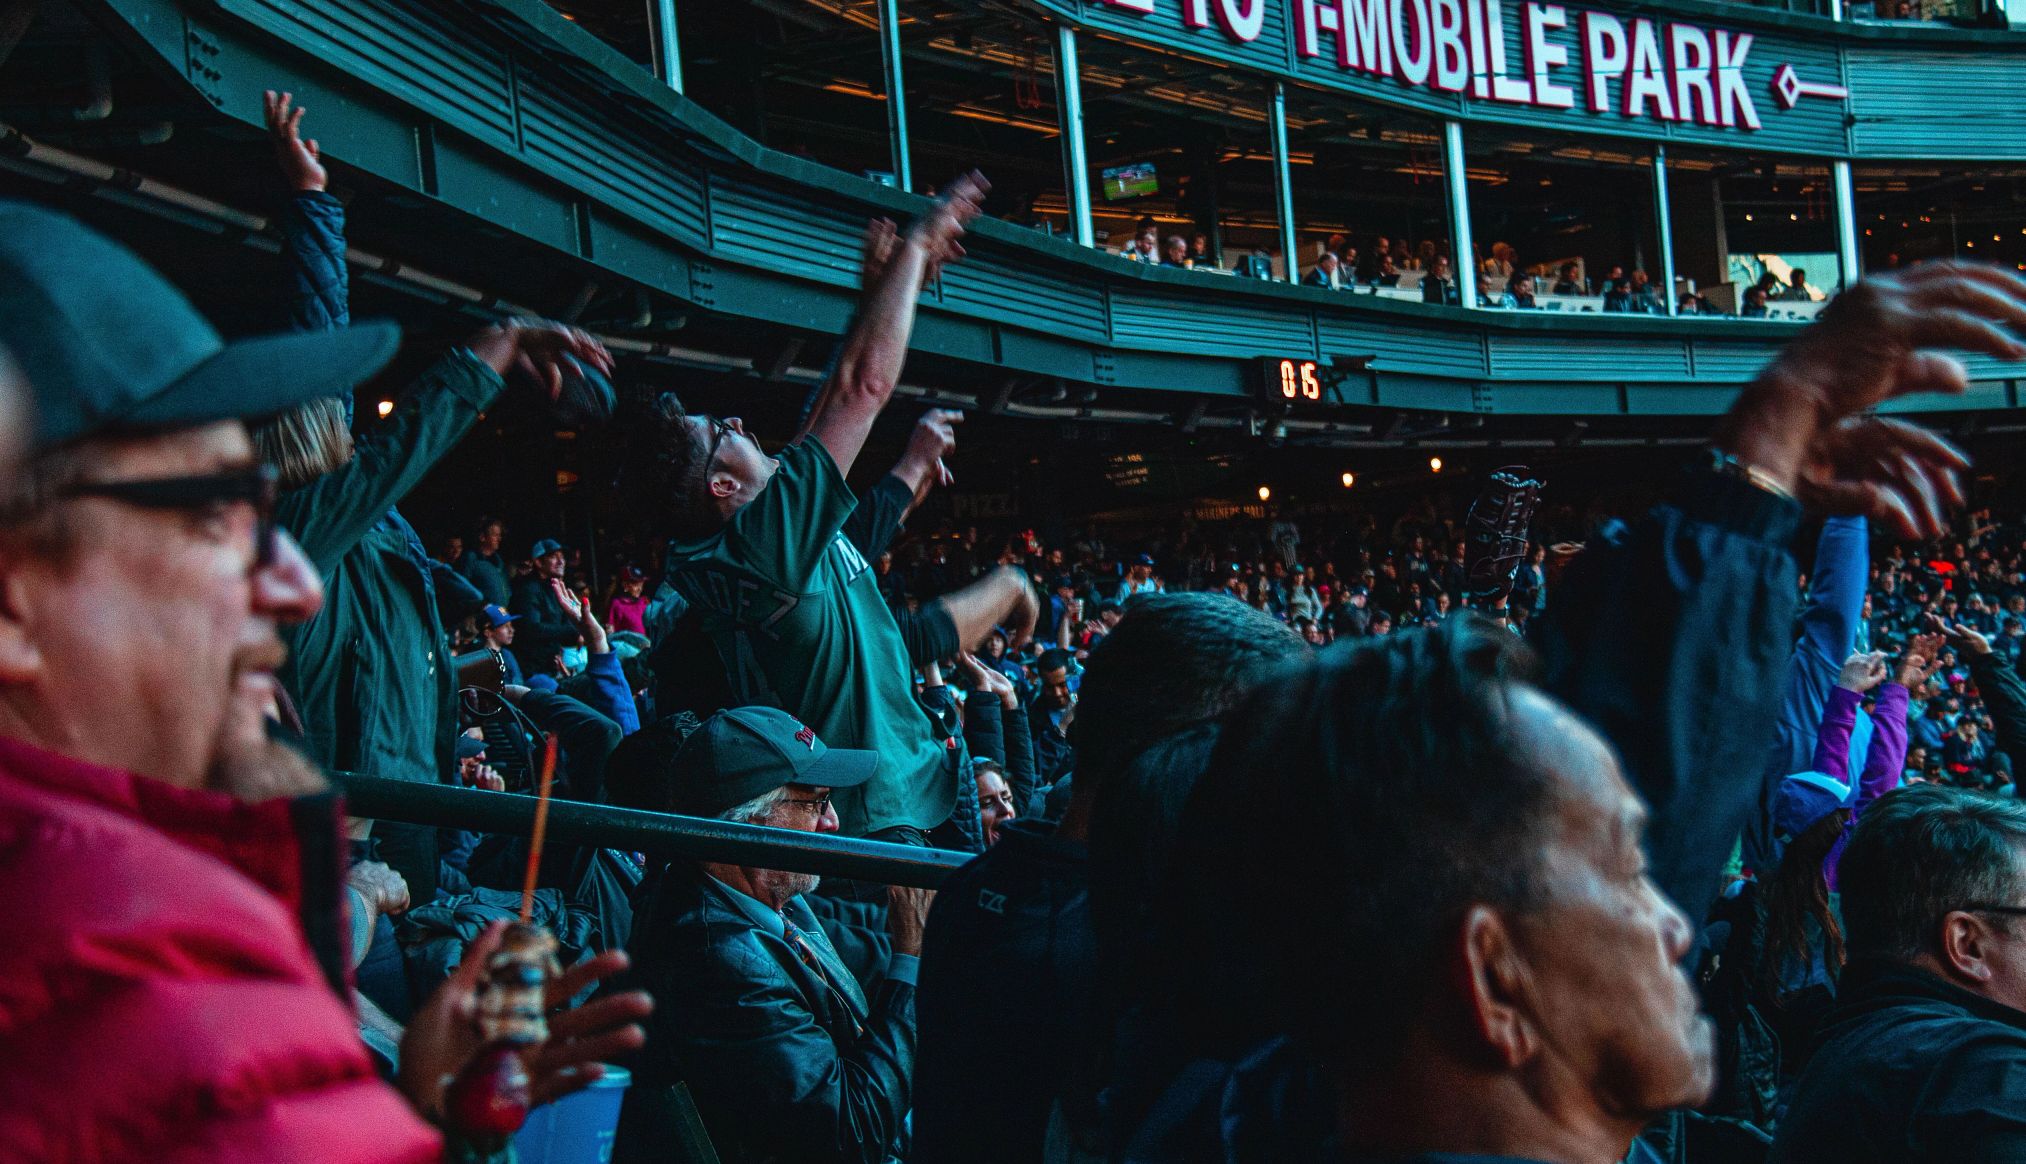 Seattle Mariners fans at a baseball game